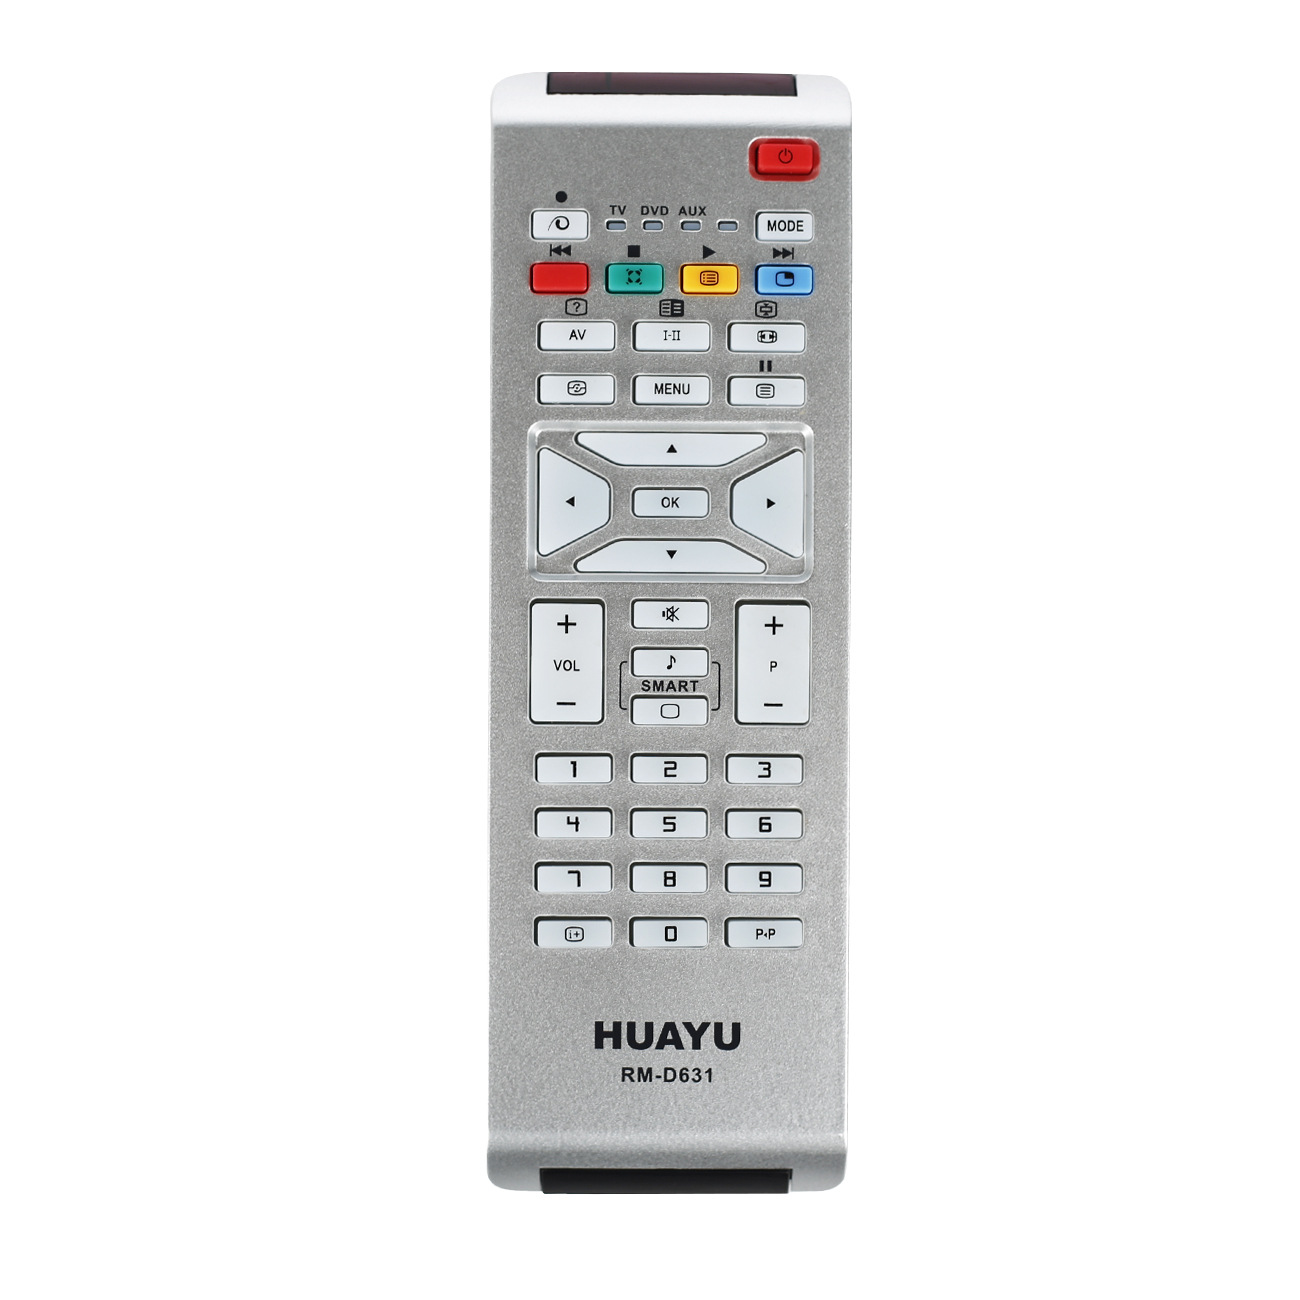 

HUAYU Universal TV Remote Control RM-D631 for Philips LCD TV